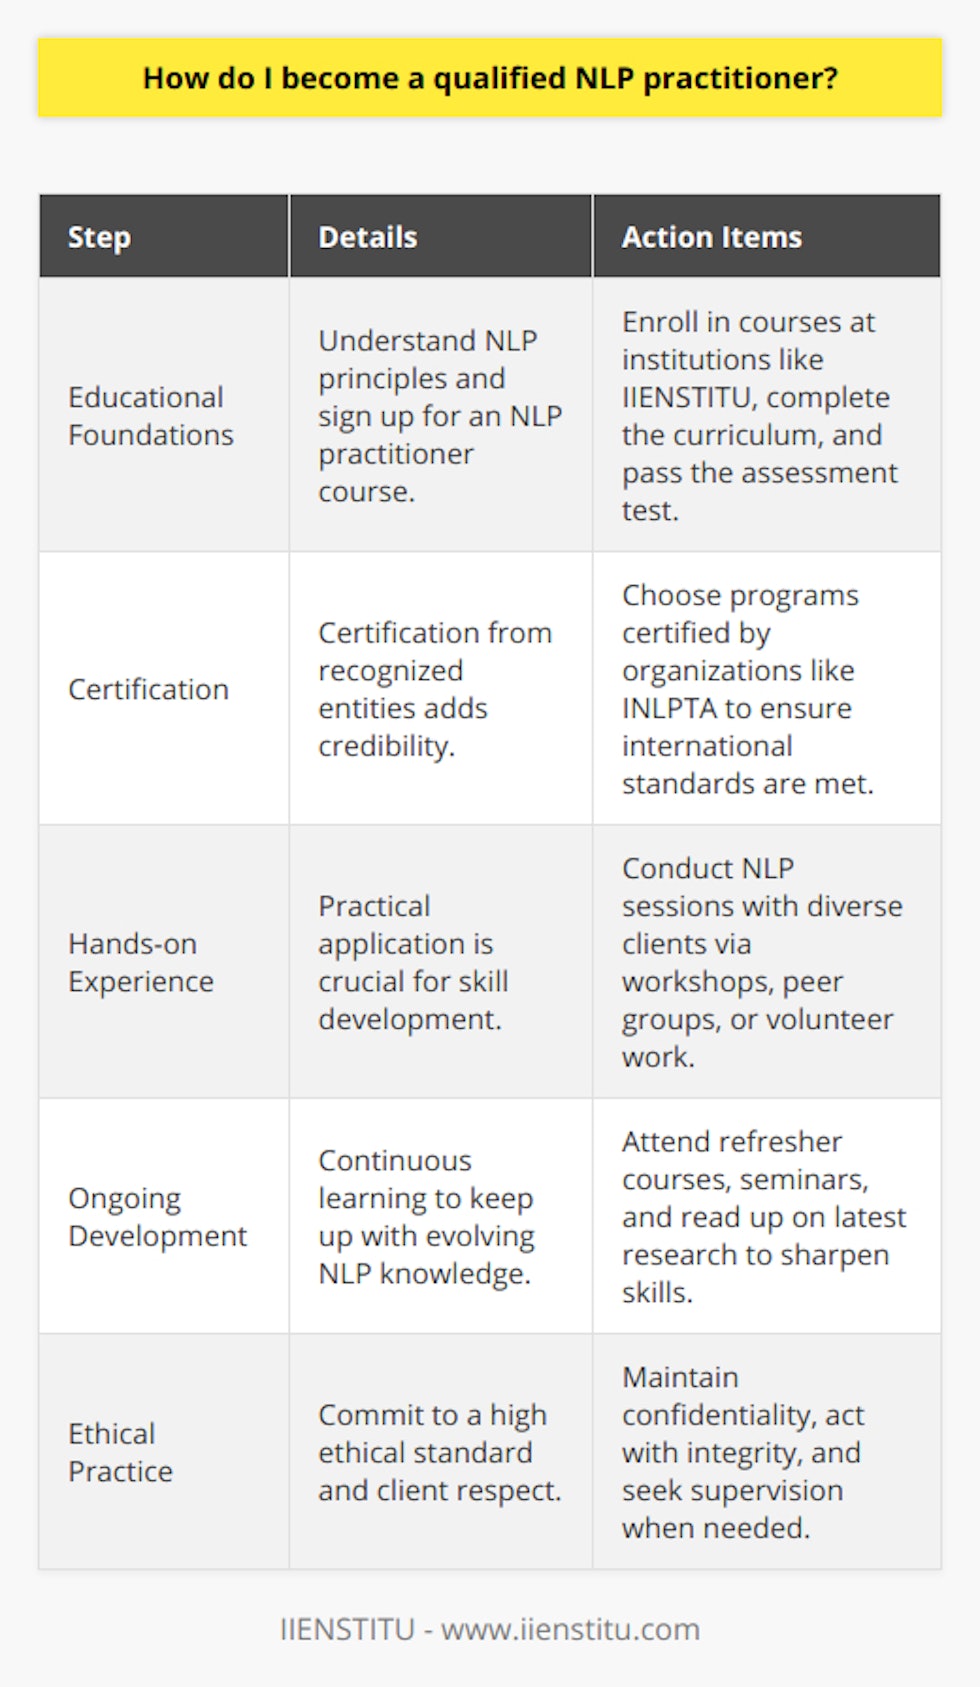 Embarking on the journey to become a qualified NLP (Neuro-Linguistic Programming) practitioner involves a multifaceted approach that combines formal education with real-world experience and continuous self-improvement. Here’s a roadmap to guide you through the essentials of becoming adept in NLP:**Educational Foundations in NLP**The educational journey begins with a comprehensive understanding of NLP principles and methodologies. Prospective practitioners should enroll in a rigorous NLP practitioner course. Courses at reputable institutions, such as IIENSTITU, are designed to cover critical topics like the history of NLP, rapport building, sensory acuity, submodalities, language patterns, and strategies for personal change. Such courses often end with an assessment test to evaluate the understanding and applicability of NLP techniques.**Selection of Accredited Certification Programs**Certification solidifies your educational investment and is a beacon of credibility in the NLP community. Opt for a recognized certification program by authoritative entities such as the International NLP Trainers Association (INLPTA). Such programs assure adherence to international standards, lending authority to your practice and providing reassurance to your clients.**Gaining Hands-on Experience**Conceptual knowledge of NLP is a cornerstone; however, practical experience is what truly hones the skills necessary for a practitioner. Post-certification, it is of paramount importance to practice NLP with a diverse array of clients. This could be through workshops, peer practice groups, free sessions for non-profit organizations, or part-time work. Remember that the richness of learning is in the diversity of your practical applications.**Commitment to Ongoing Development**NLP is an ever-evolving field, and commitment to continuous learning is key. Attend NLP refresher courses, advanced seminars, and stay abreast of the latest research by reading scholarly articles and NLP publications. This dedication not only sharpens your skills but also contributes to the NLP body of knowledge.**Ethical Practice**Upholding a stringent ethical code is non-negotiable. As an NLP practitioner, respect client confidentiality, act with integrity, and continually evaluate the impact of your interventions. Should complexities arise, seek supervision or collaborate with other professionals to ensure the highest standards of practice.Steering one's path towards becoming a qualified NLP practitioner is about intertwining the threads of education, certification, practice, lifelong learning, and ethical conduct into a professional tapestry. The journey is iterative and demands perseverance, but for those passionate about personal development and human potential, it's a pursuit that promises profound fulfillment and impact.